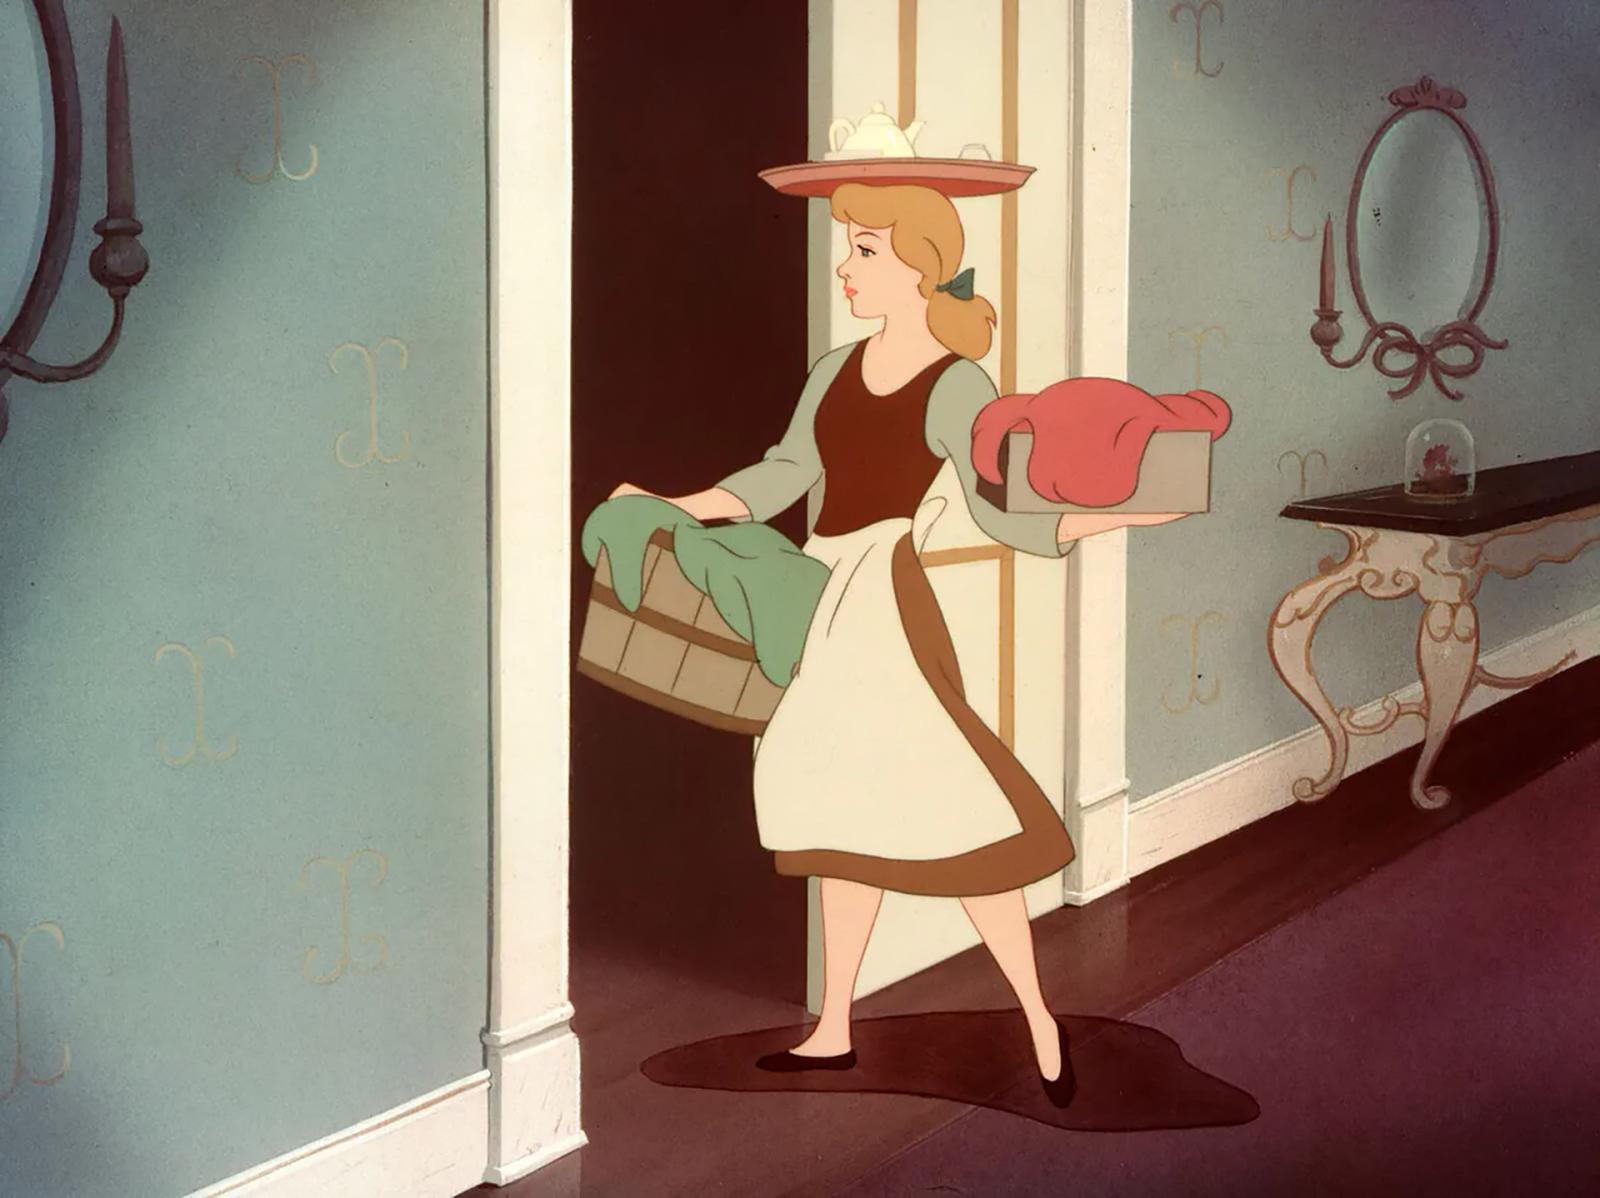 7 Disney Movie Tropes That Are Problematic As Hell (Or Just Plain Stupid) - image 4